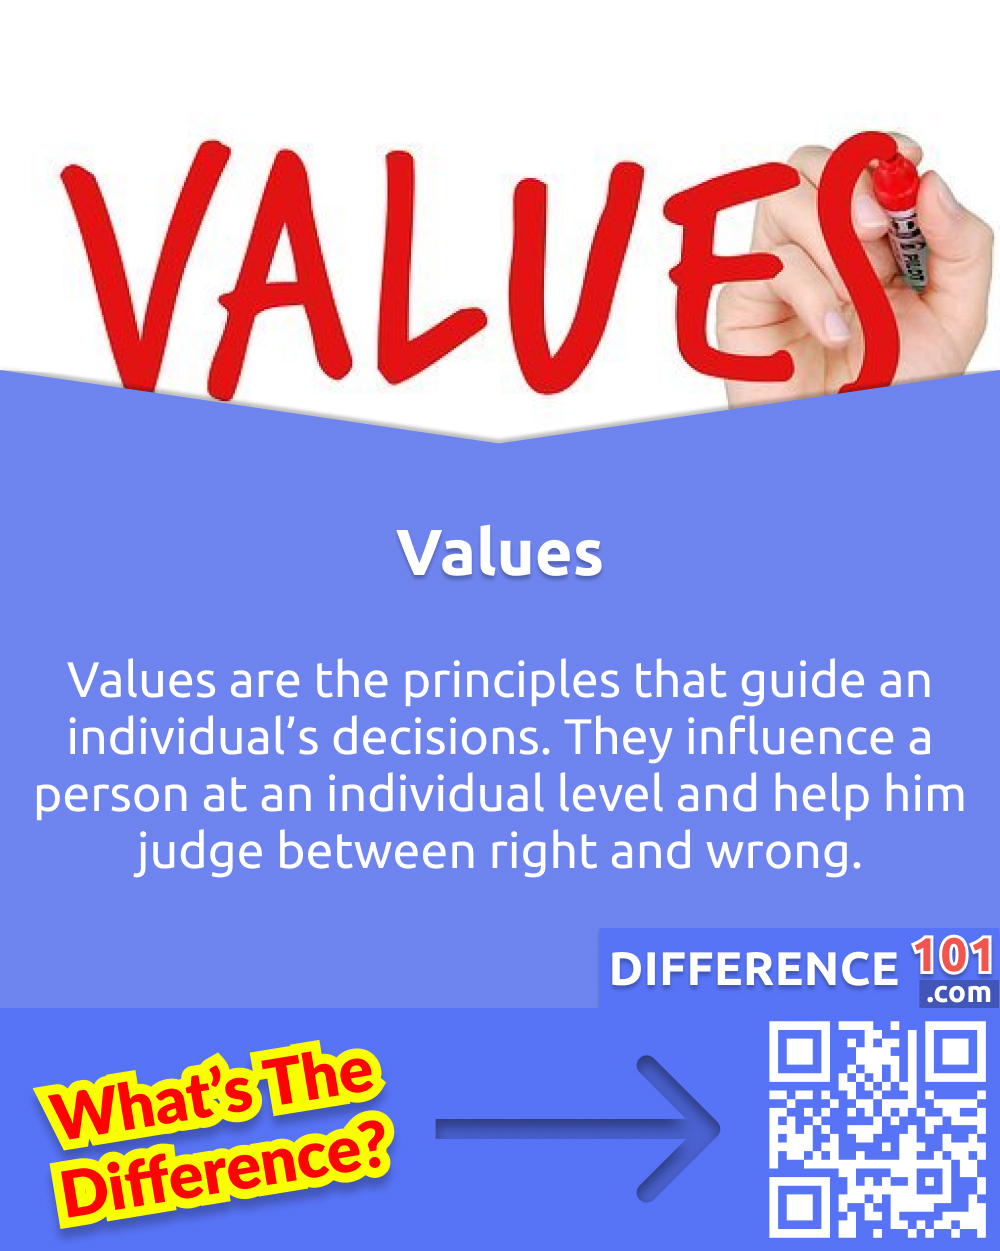 difference between ethics and values essay